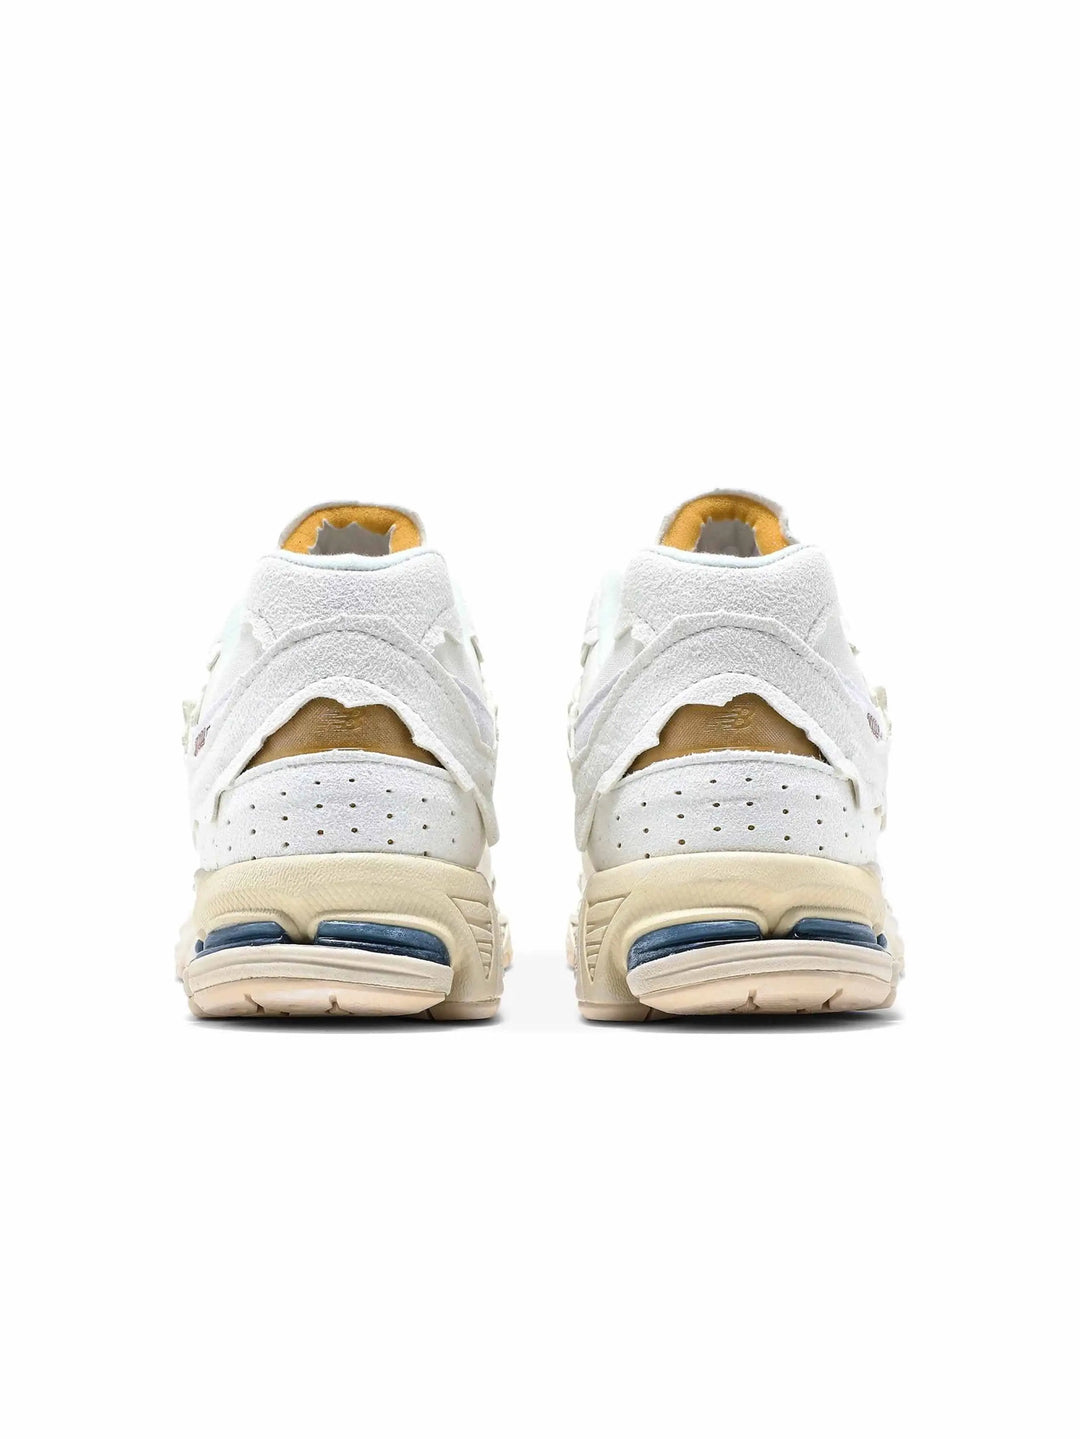 New Balance 2002R Protection Pack Sea Salt in Auckland, New Zealand - Shop name